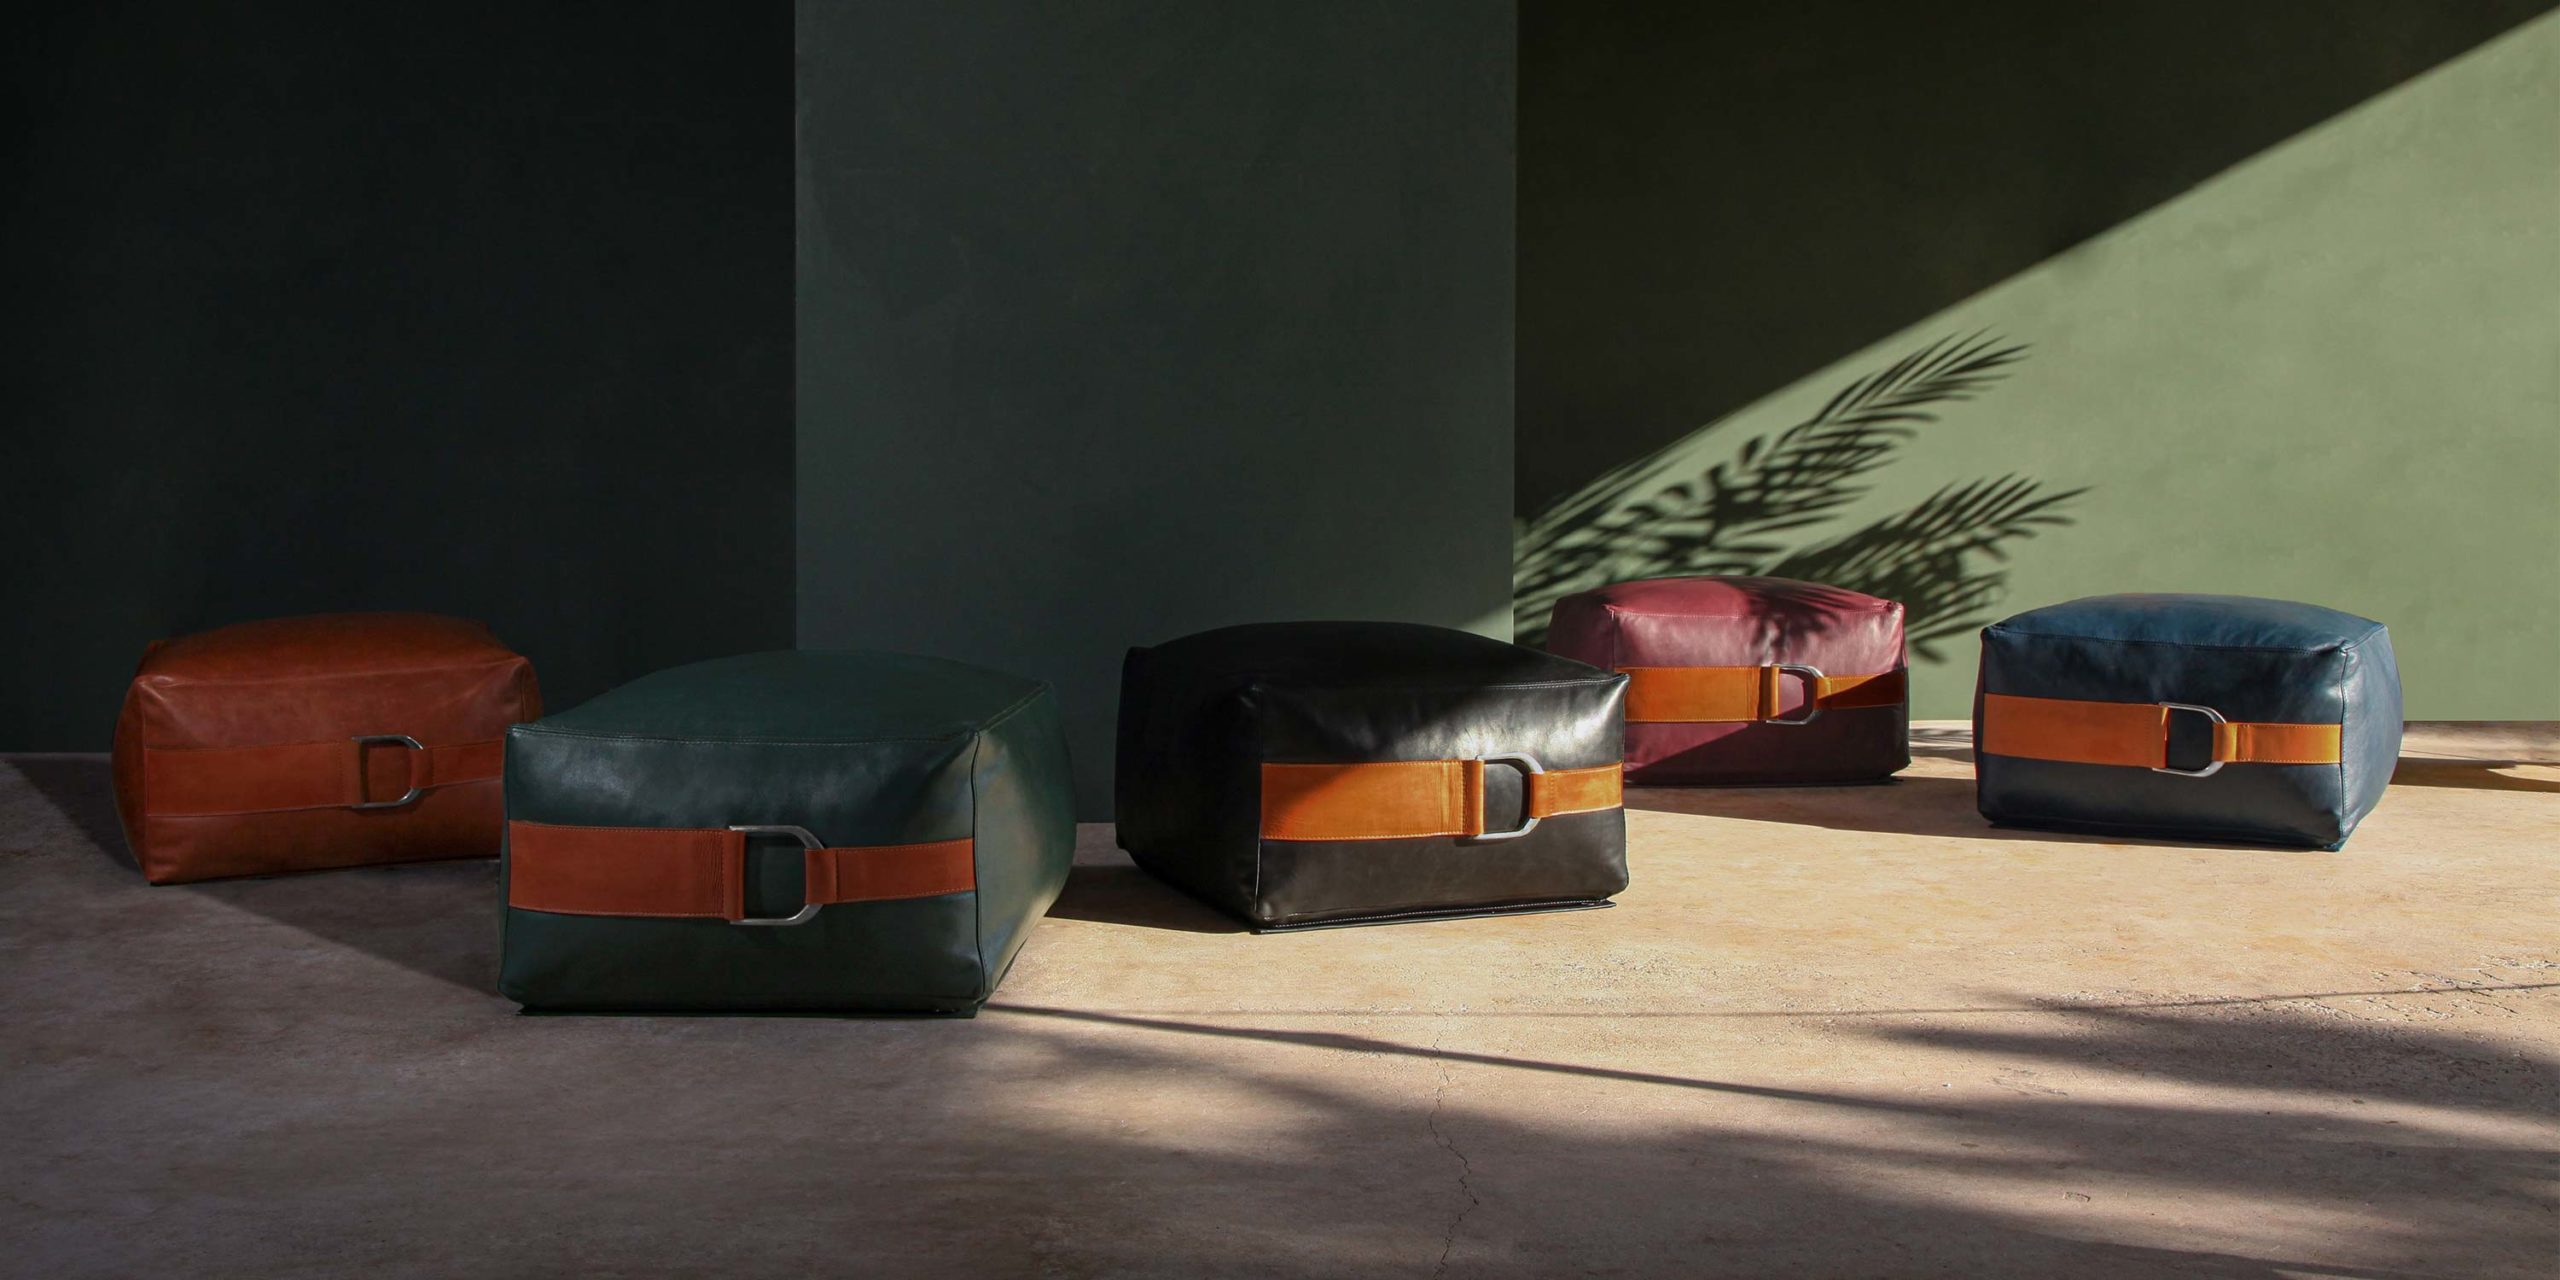 Talabartero Leather Collection, jewel tone leather poufs and bolster throw pillows